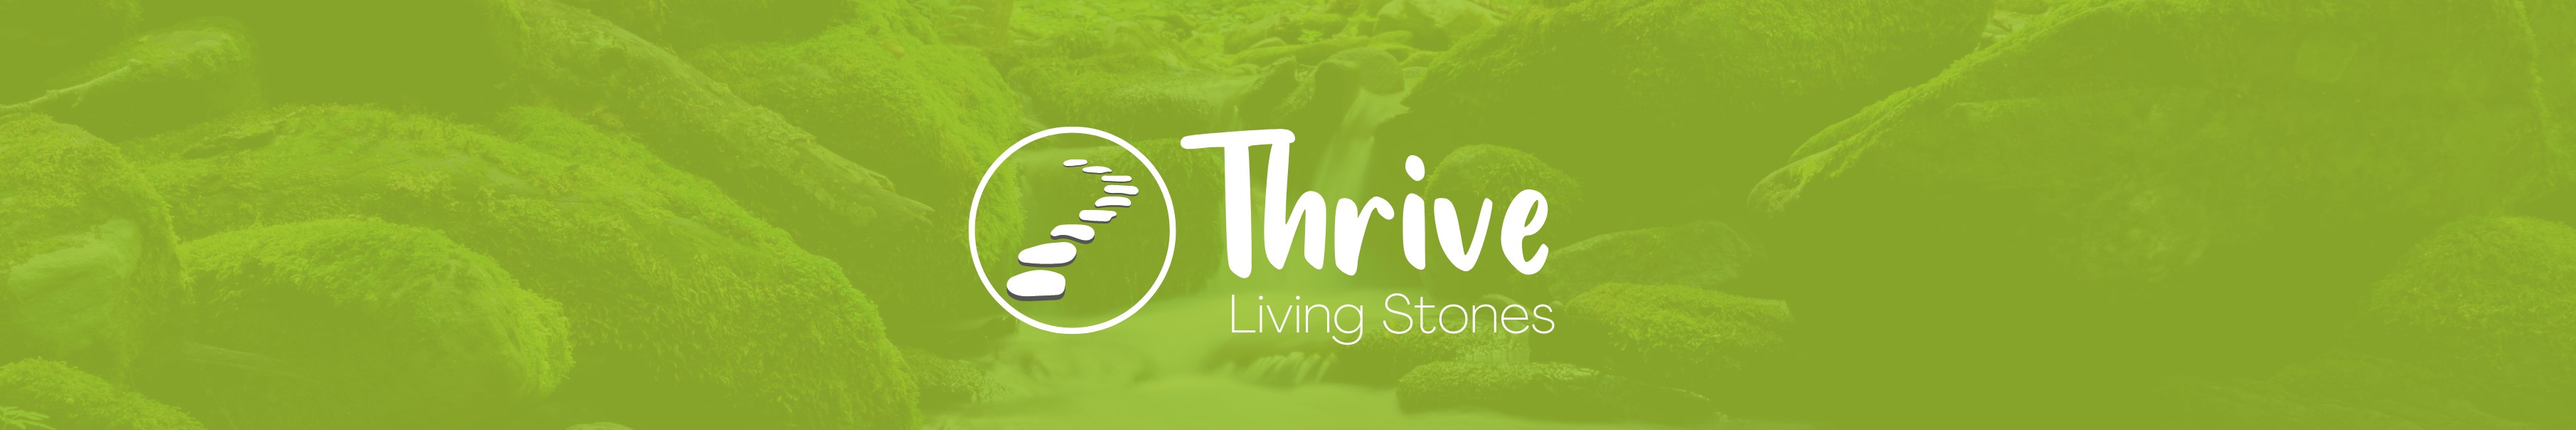 Thrive Group Living Stones banner